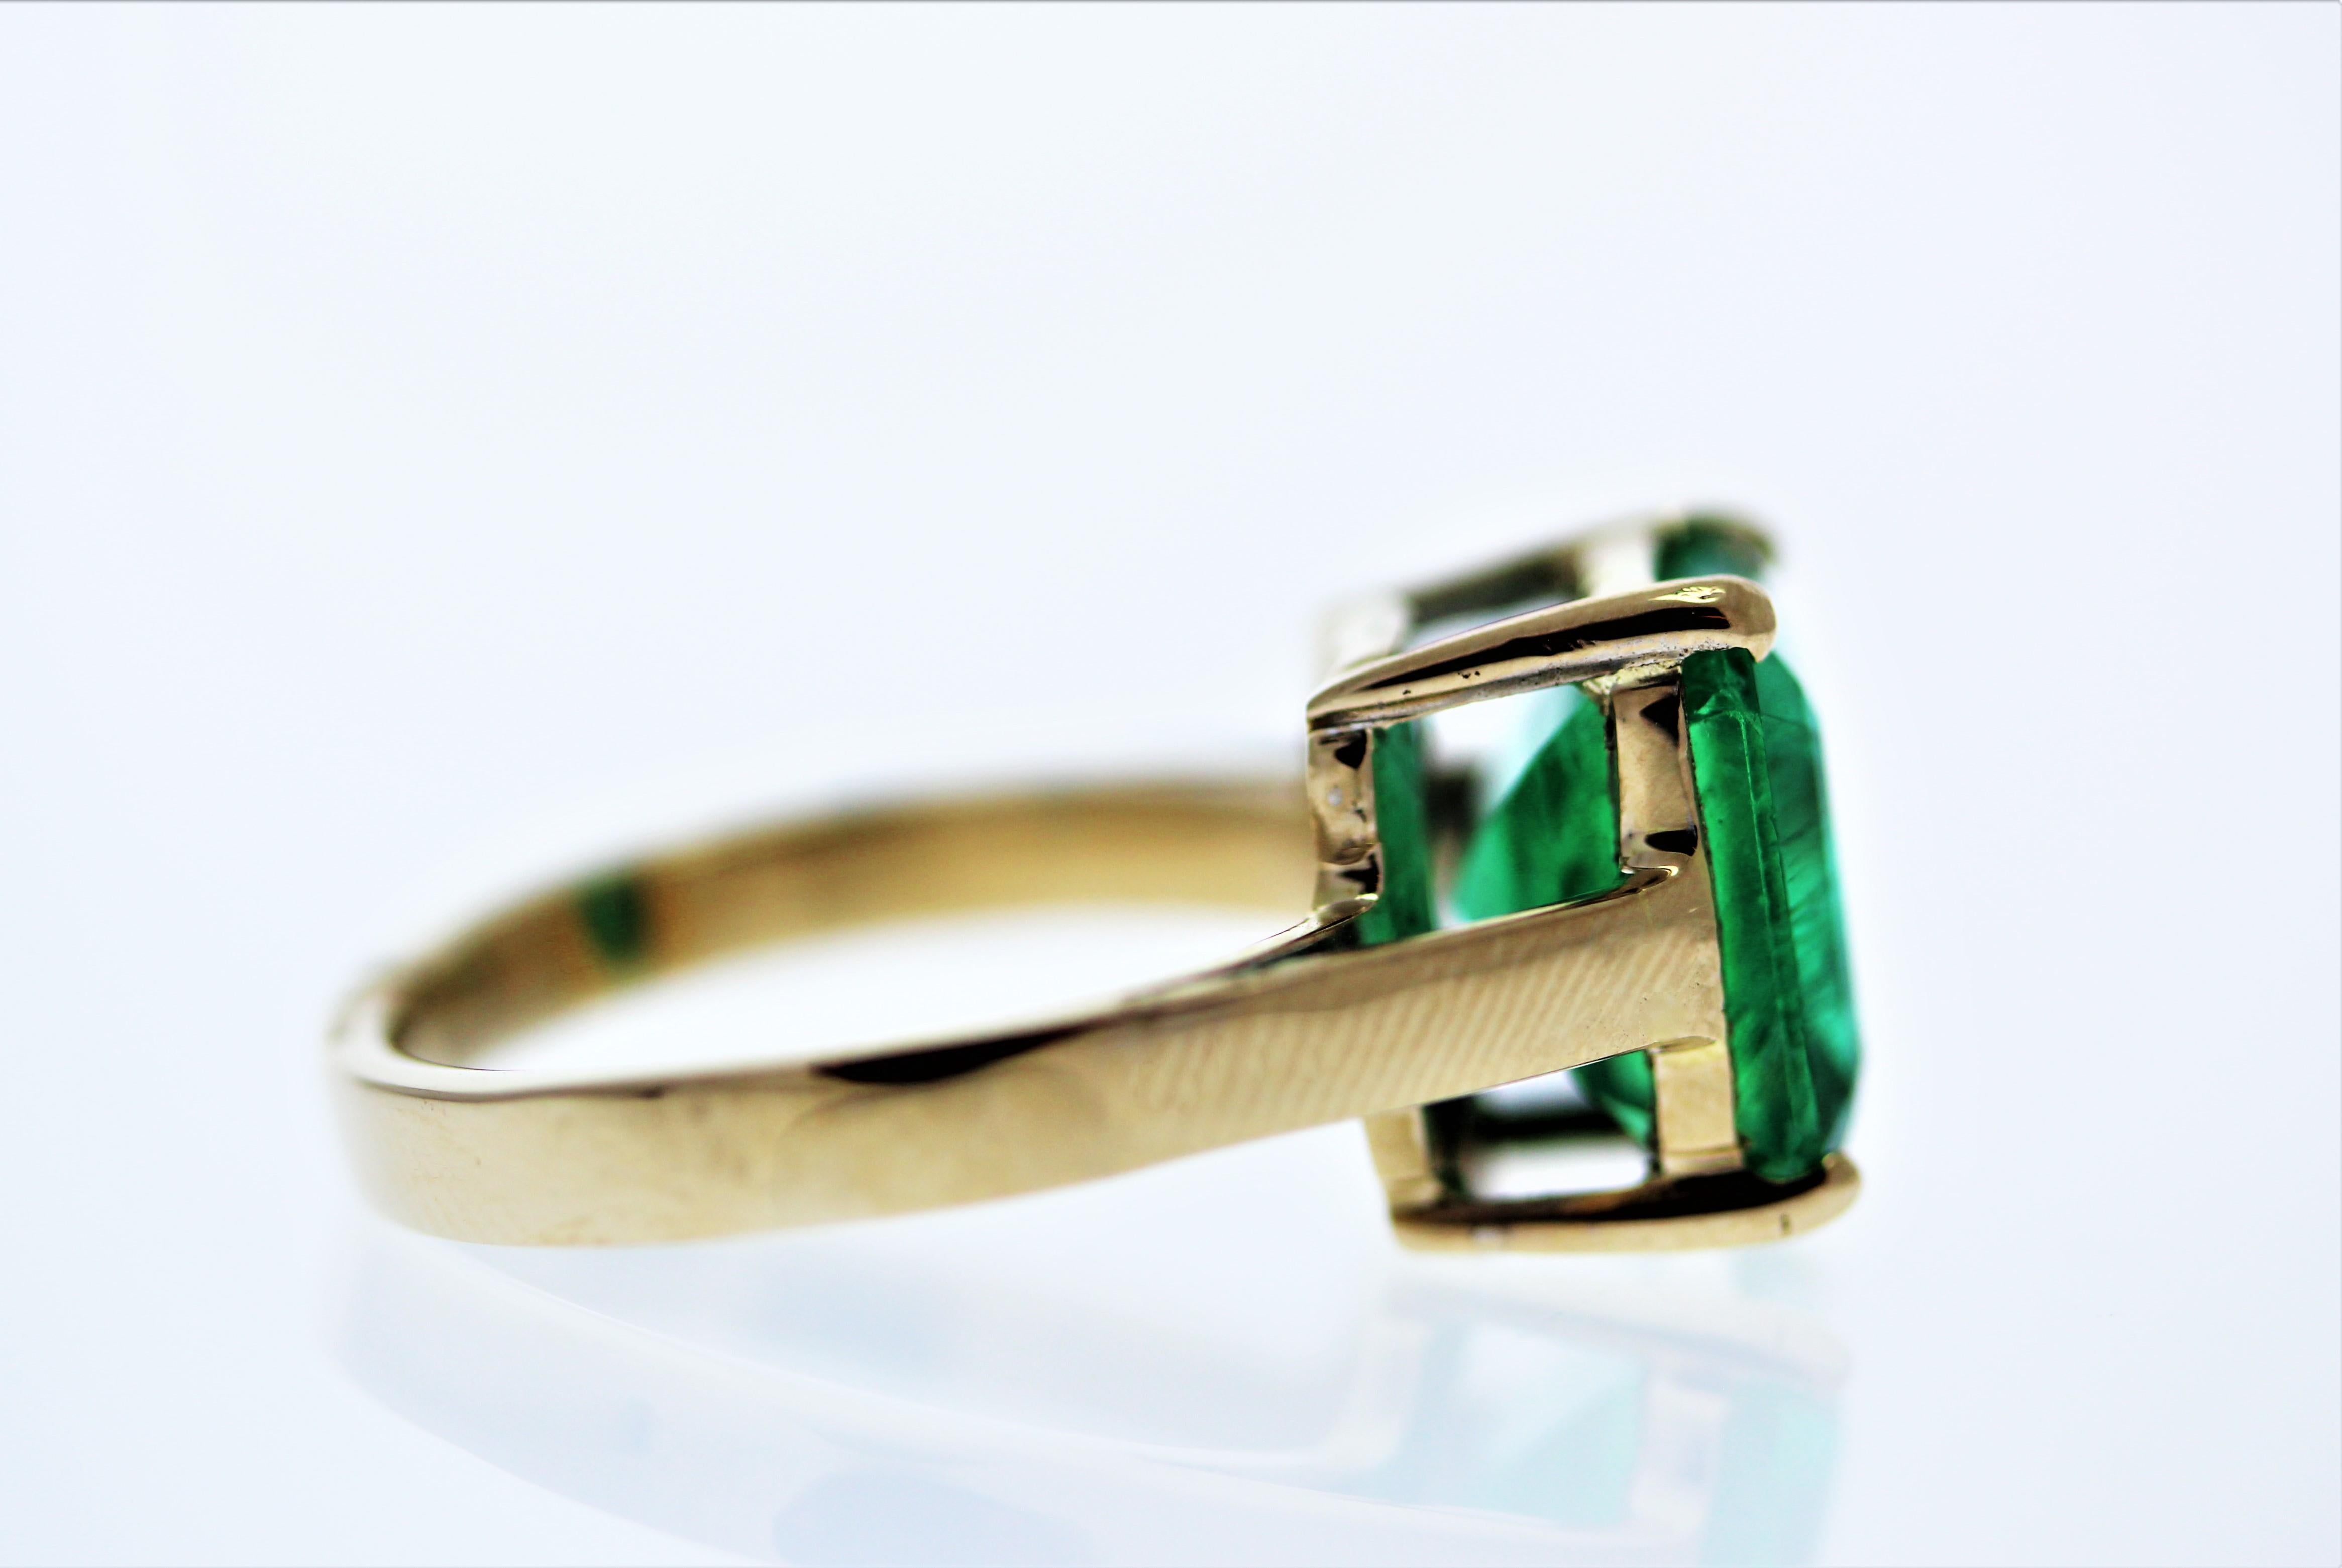 Would you look at this beauty! Simple in design, but there is nothing ordinary about the gorgeous color of this breathtaking green emerald ring. This stunning piece features an emerald cut 4.28 carats emerald, set into a four-prong. The emerald is